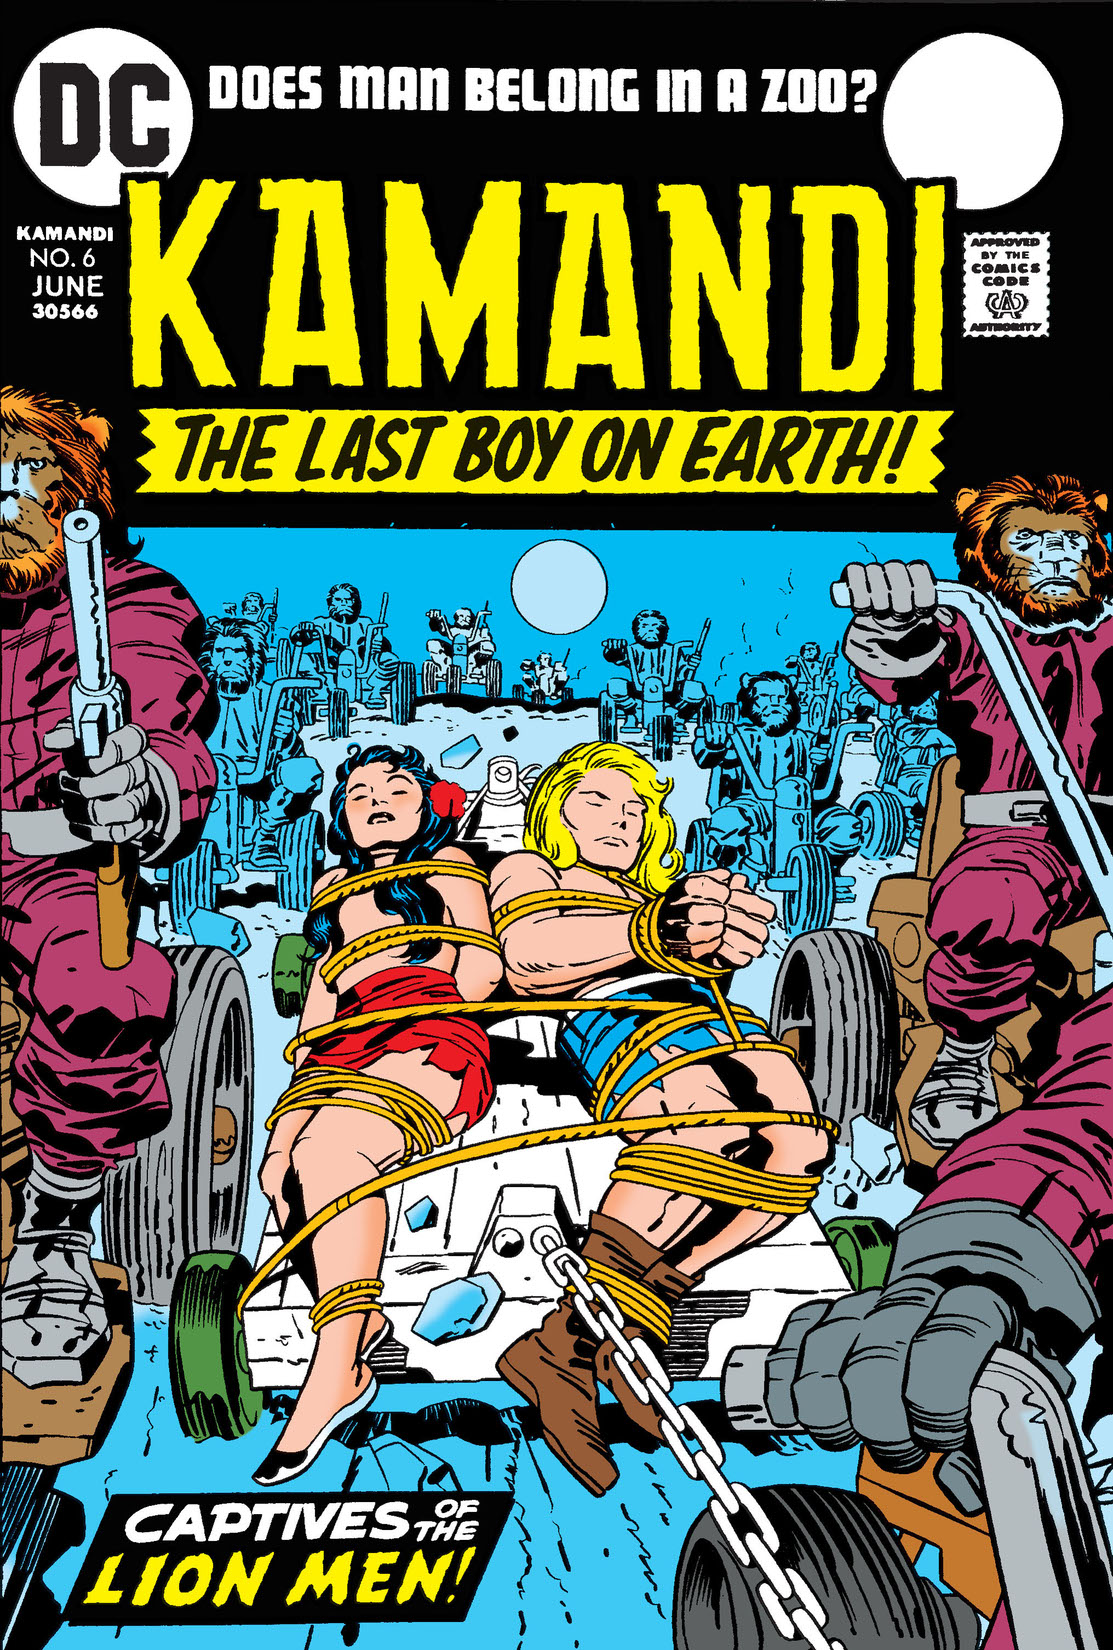 Kamandi: The Last Boy on Earth #6 preview images